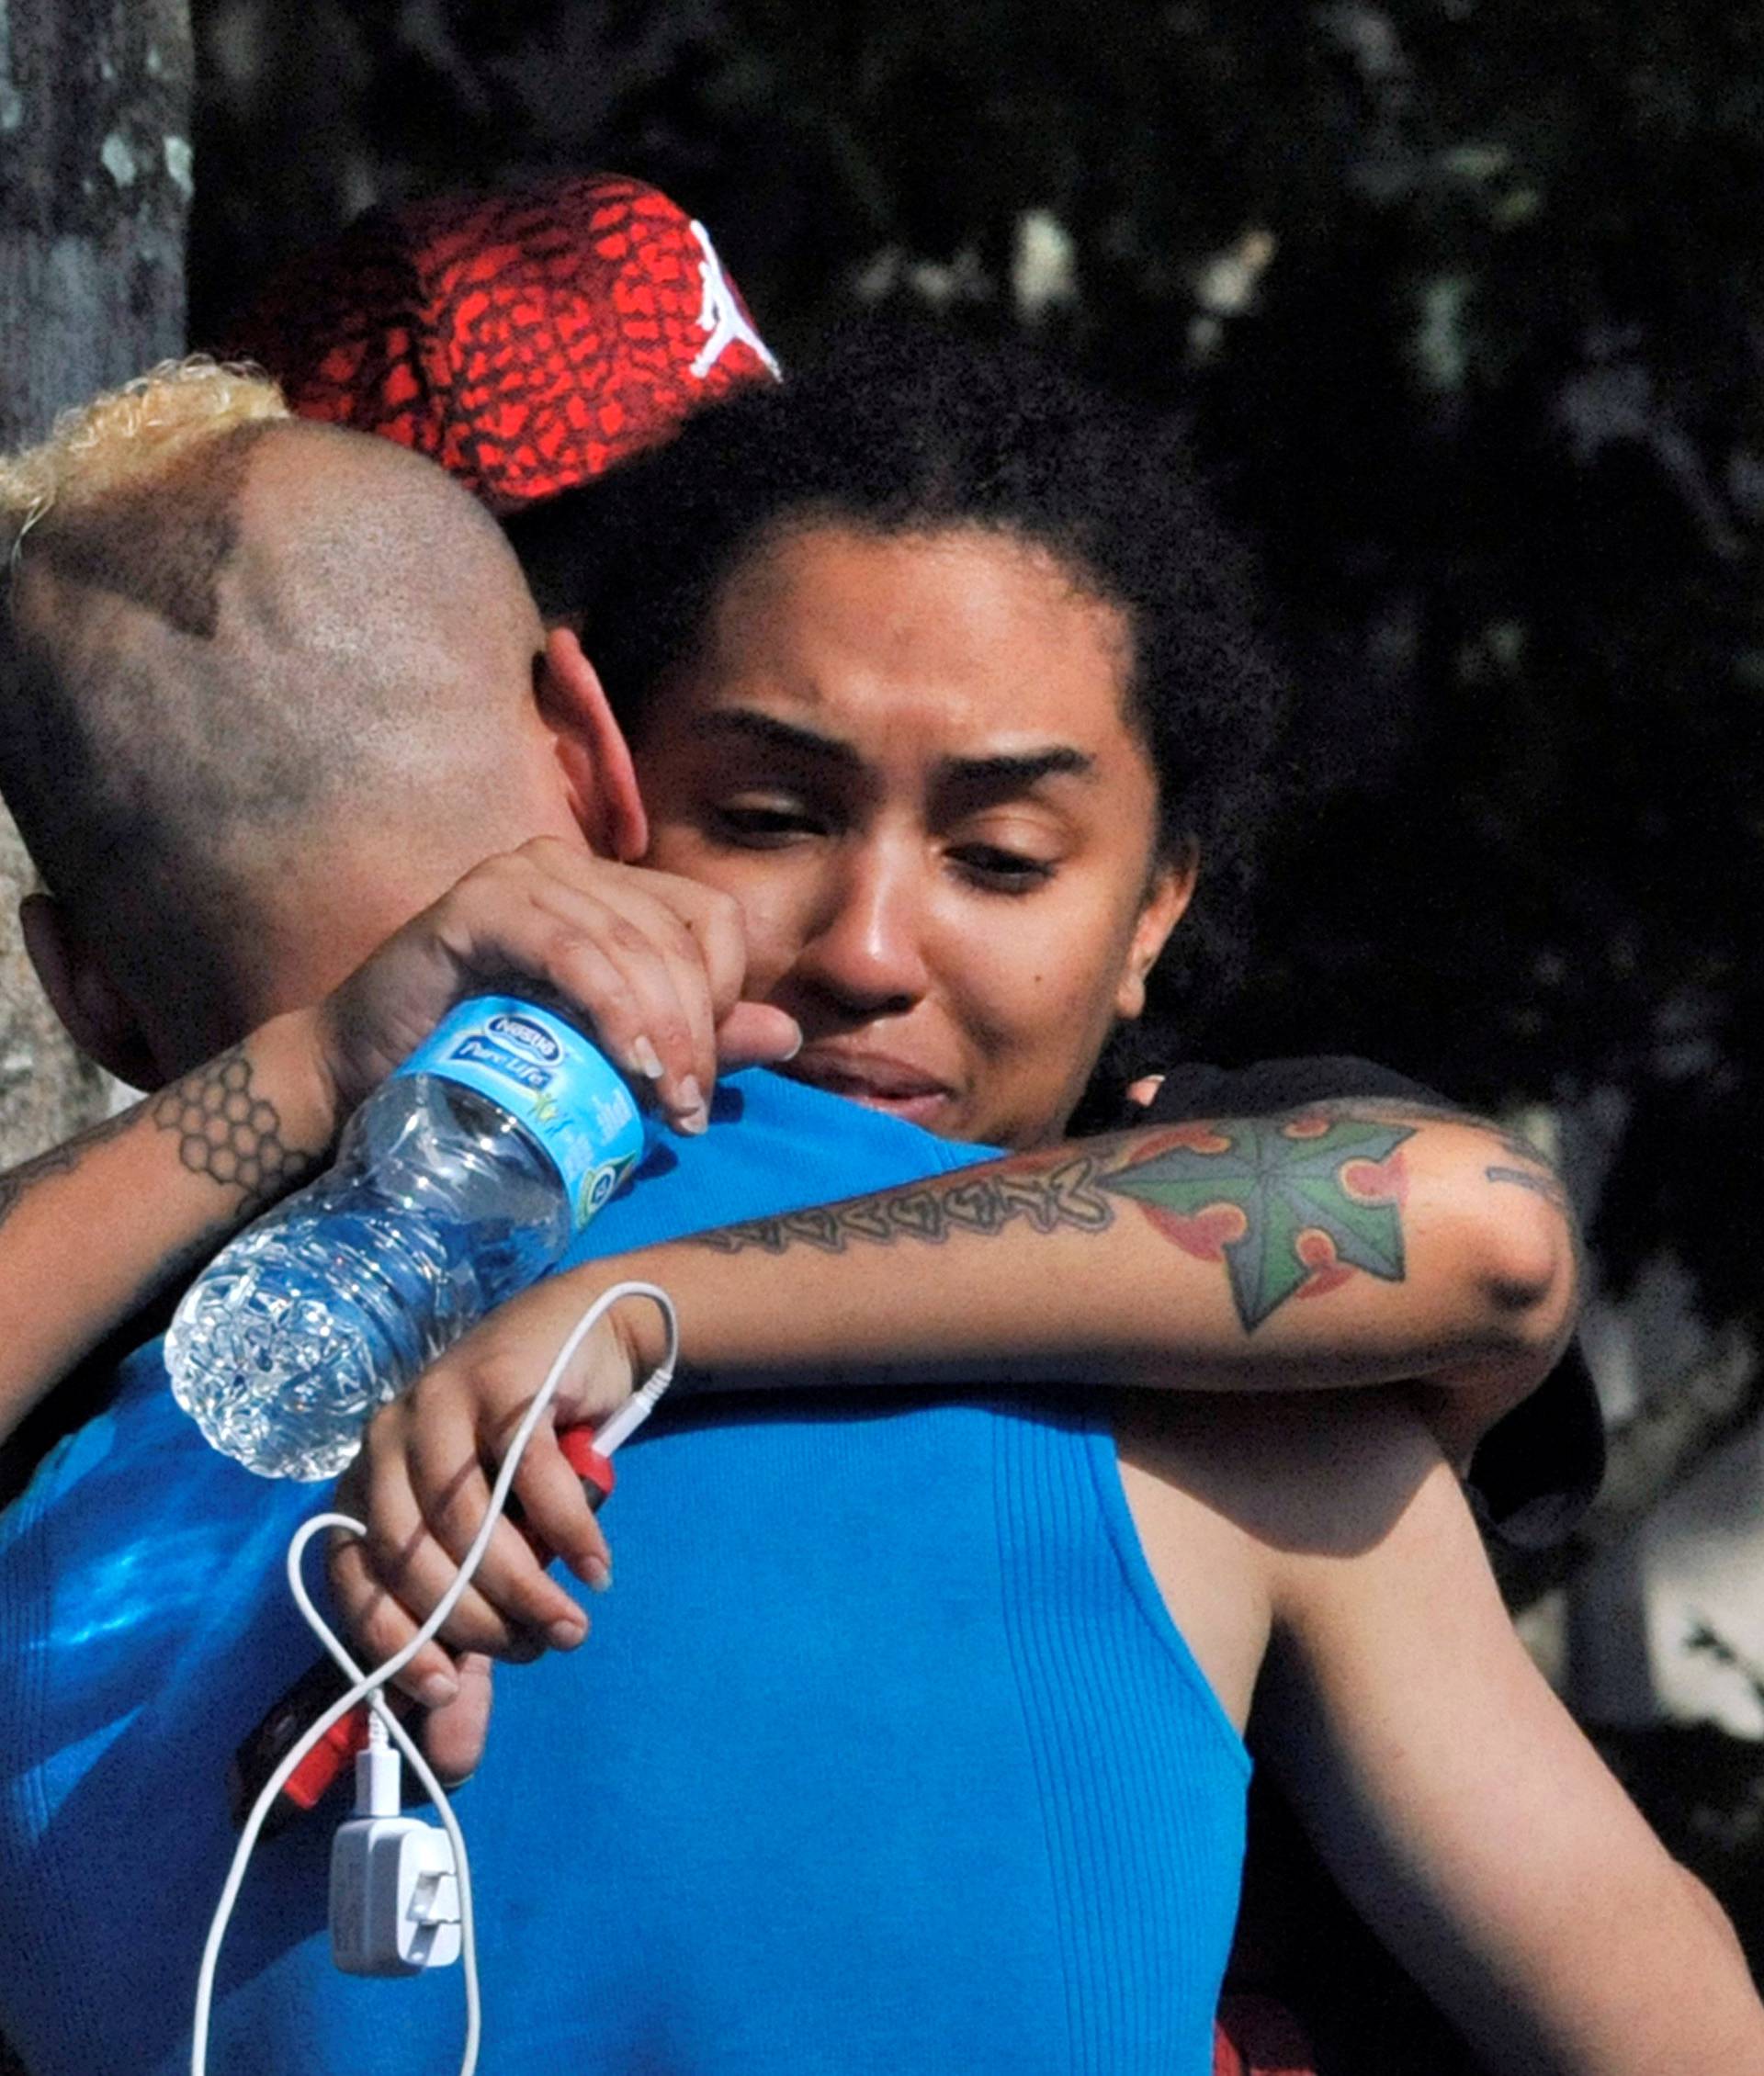 Friends and family members embrace outside the Orlando Police Headquarters during the investigation of a shooting at the Pulse nightclub in Orlando, Florida